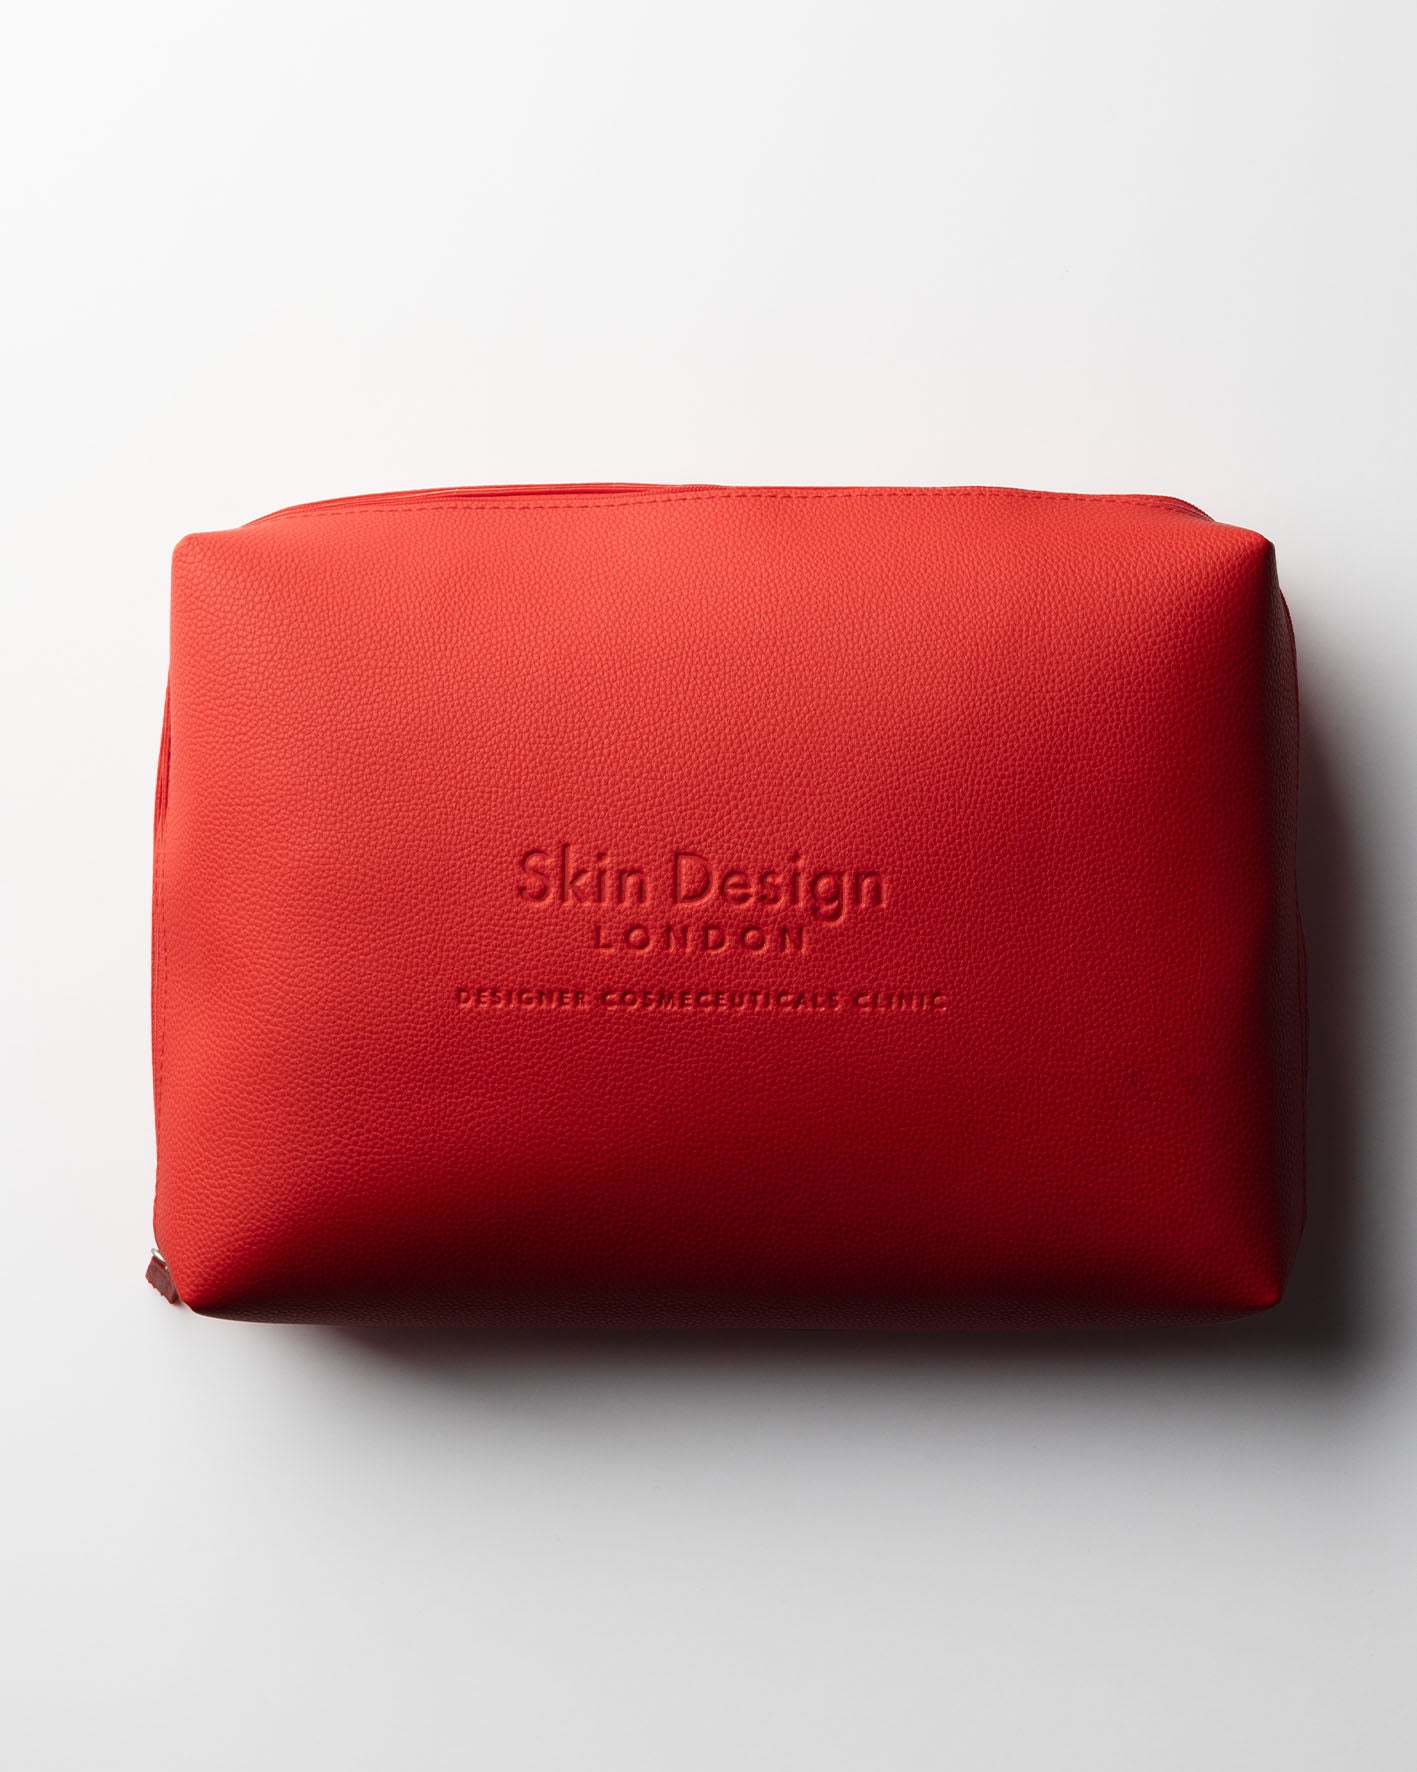 SDL Red Travel Pouch